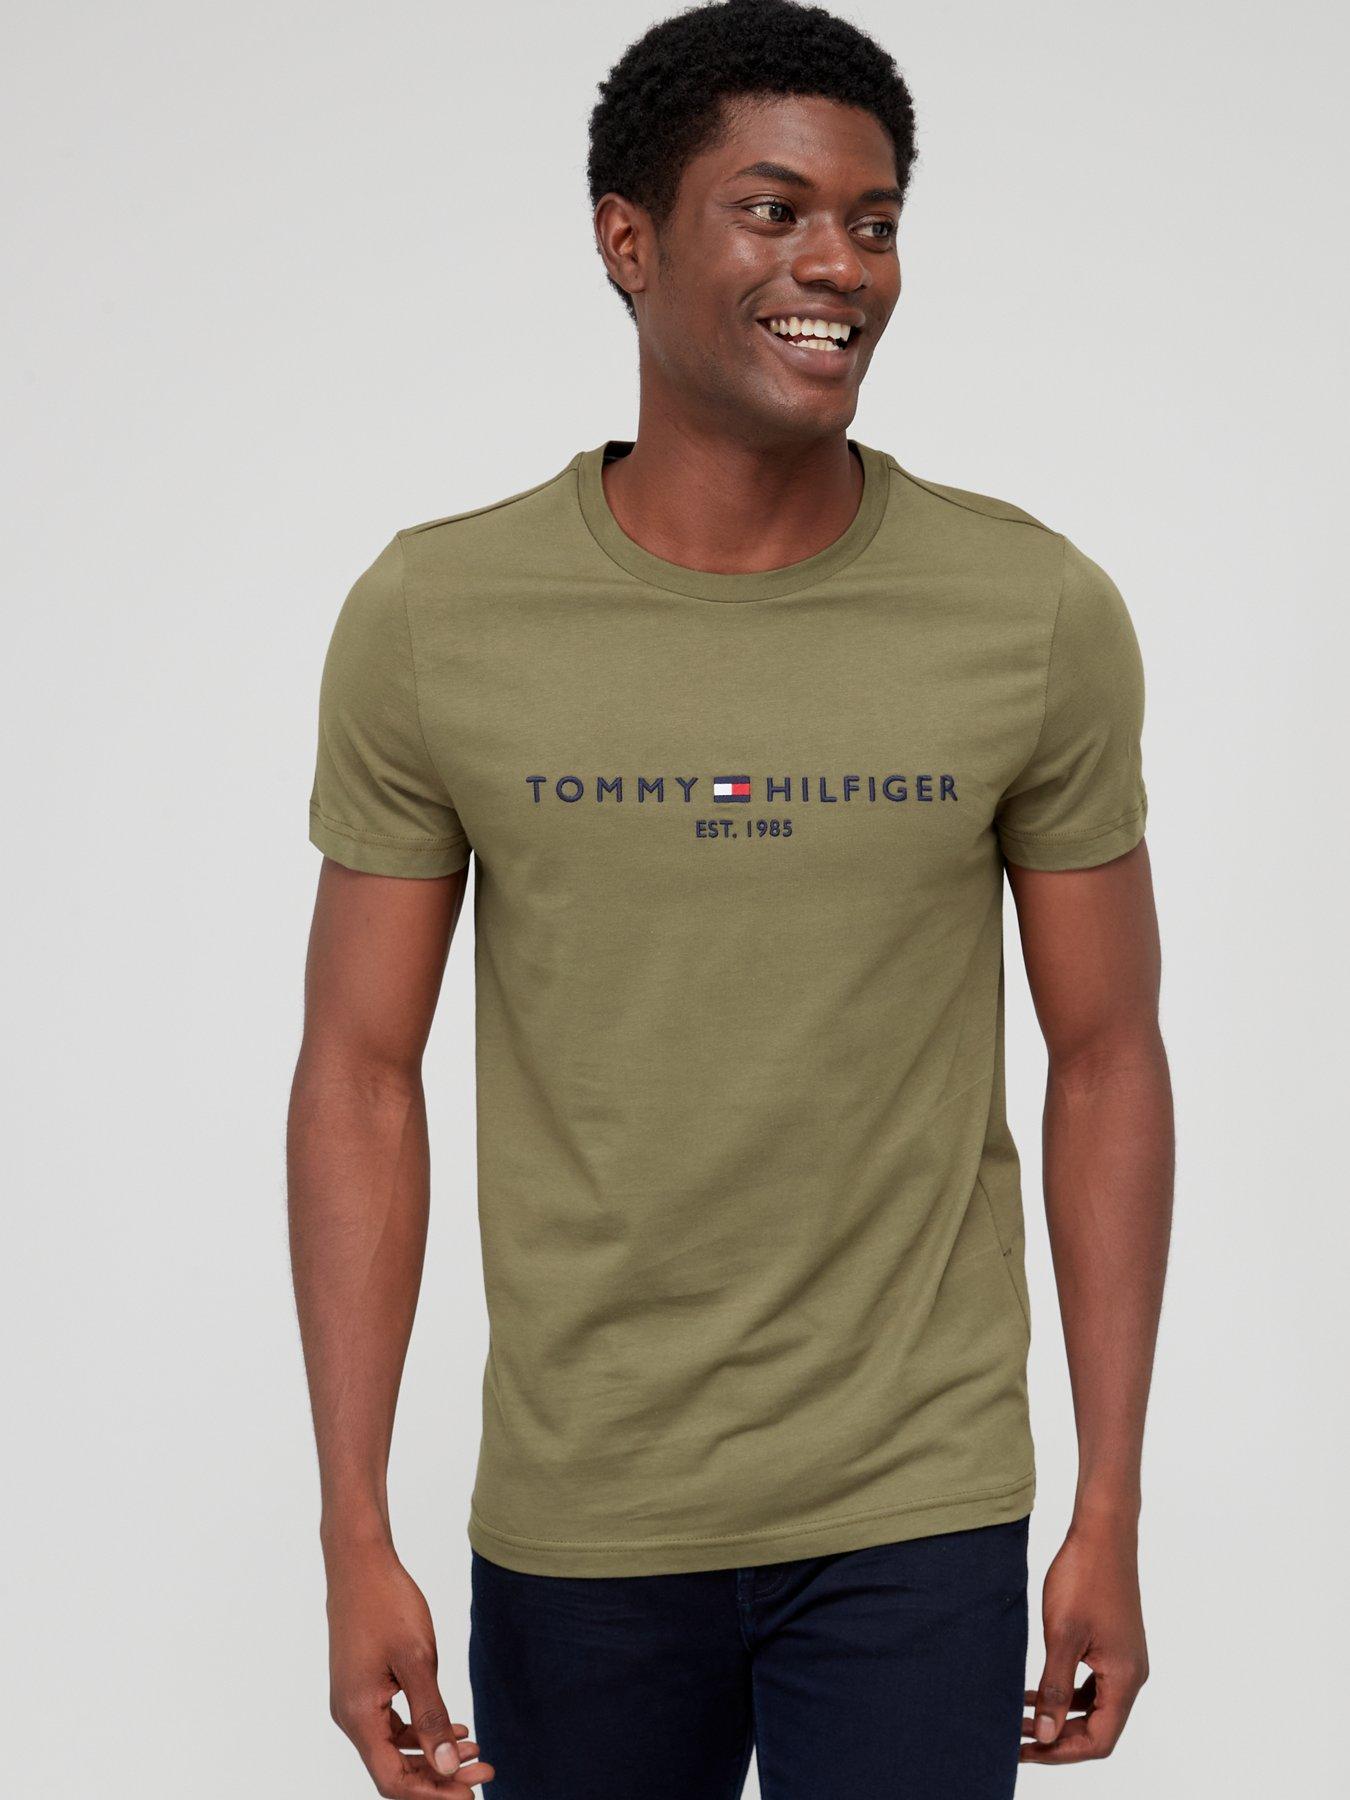 T-shirts | Ireland & | hilfiger polos Tommy | Very Men